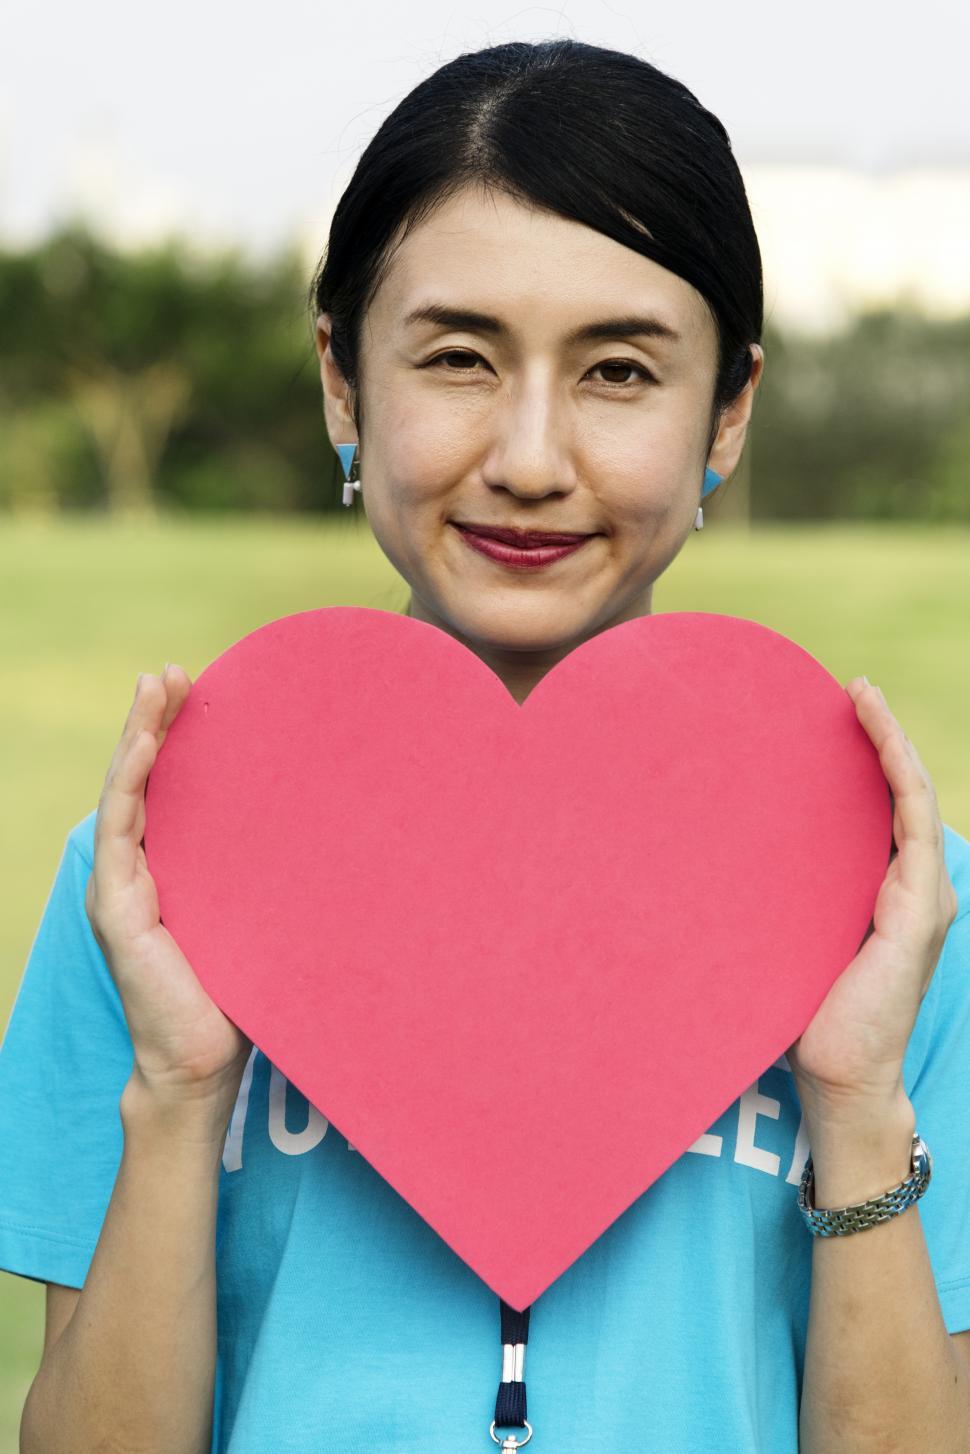 Free Image of A young Asian ethnicity woman posing with a red heart shaped cut out 